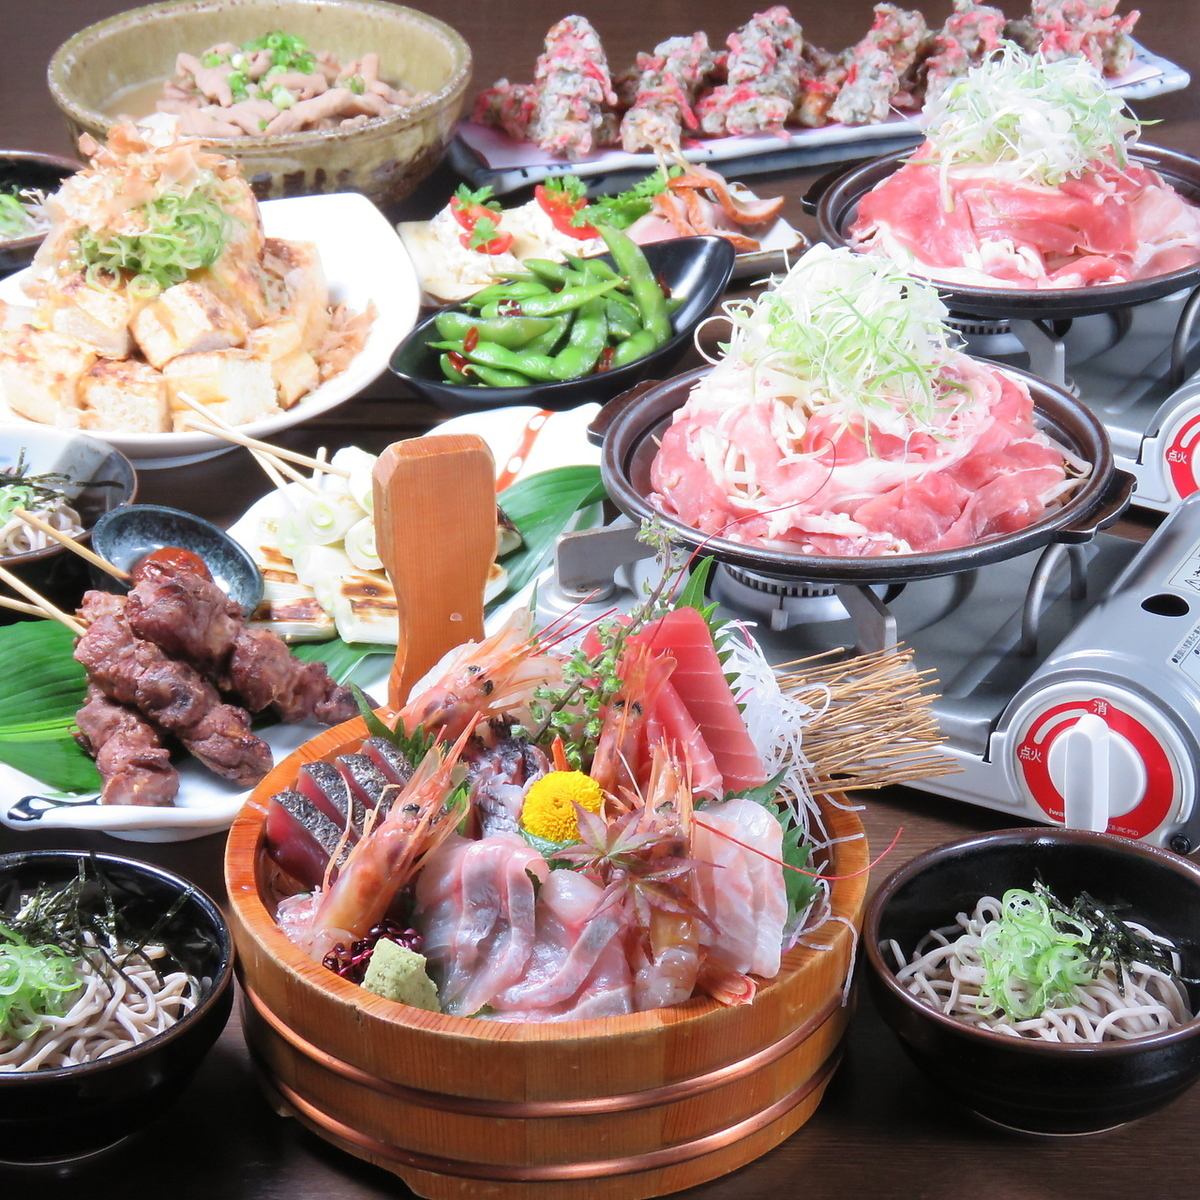 A hearty banquet course with all-you-can-drink starts from 4,000 JPY!